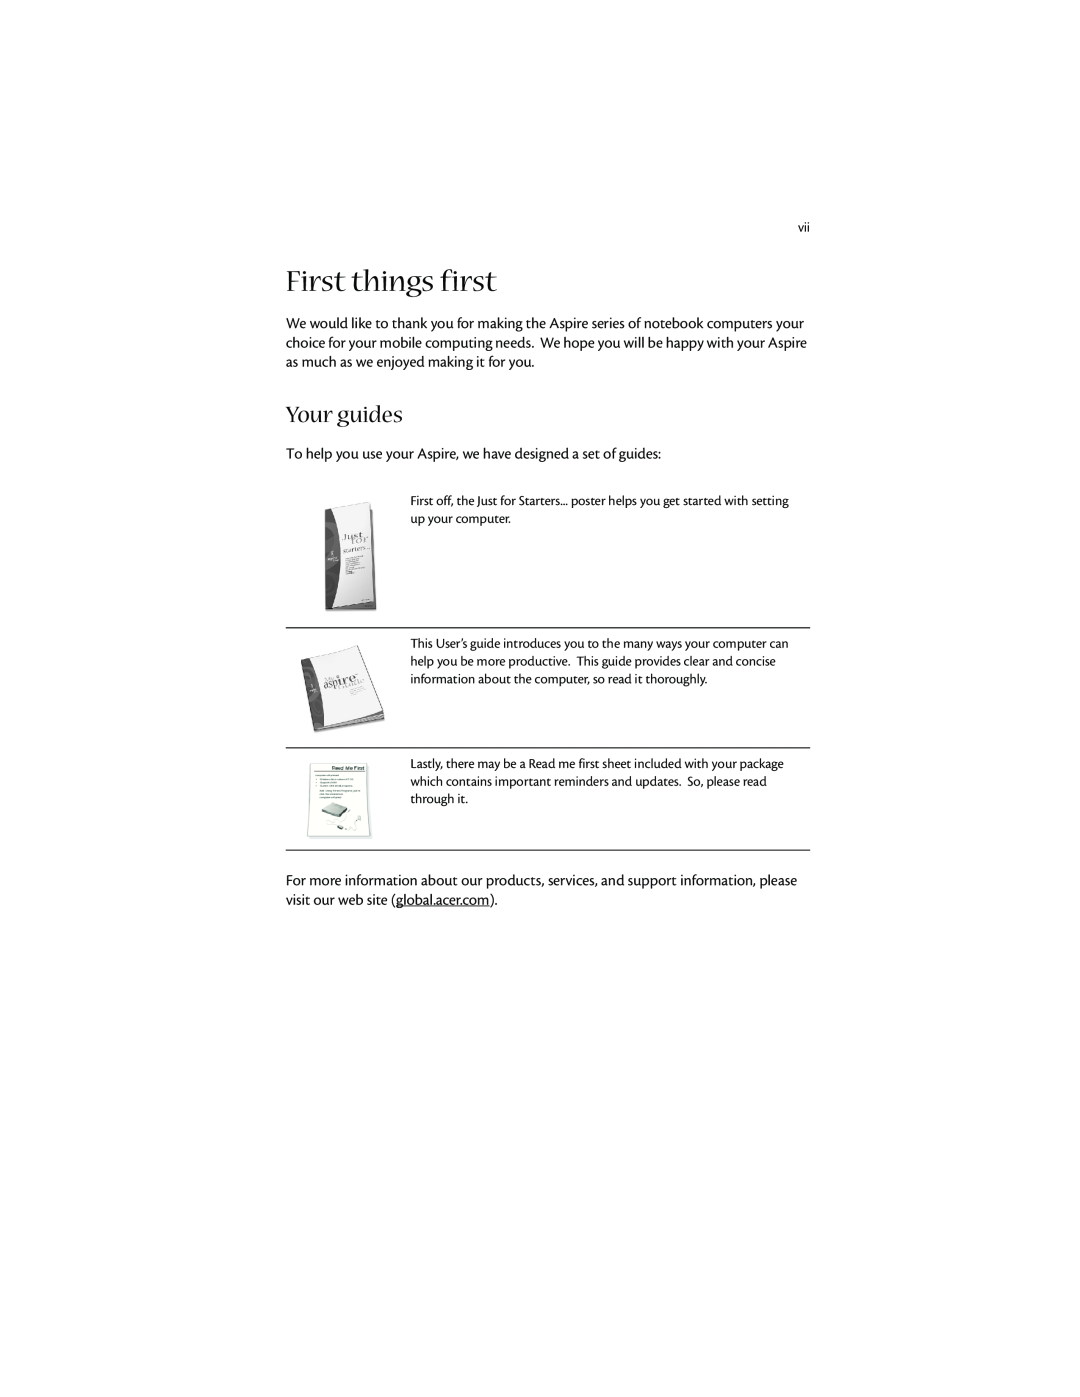 Acer 1400 manual First things first, Your guides 